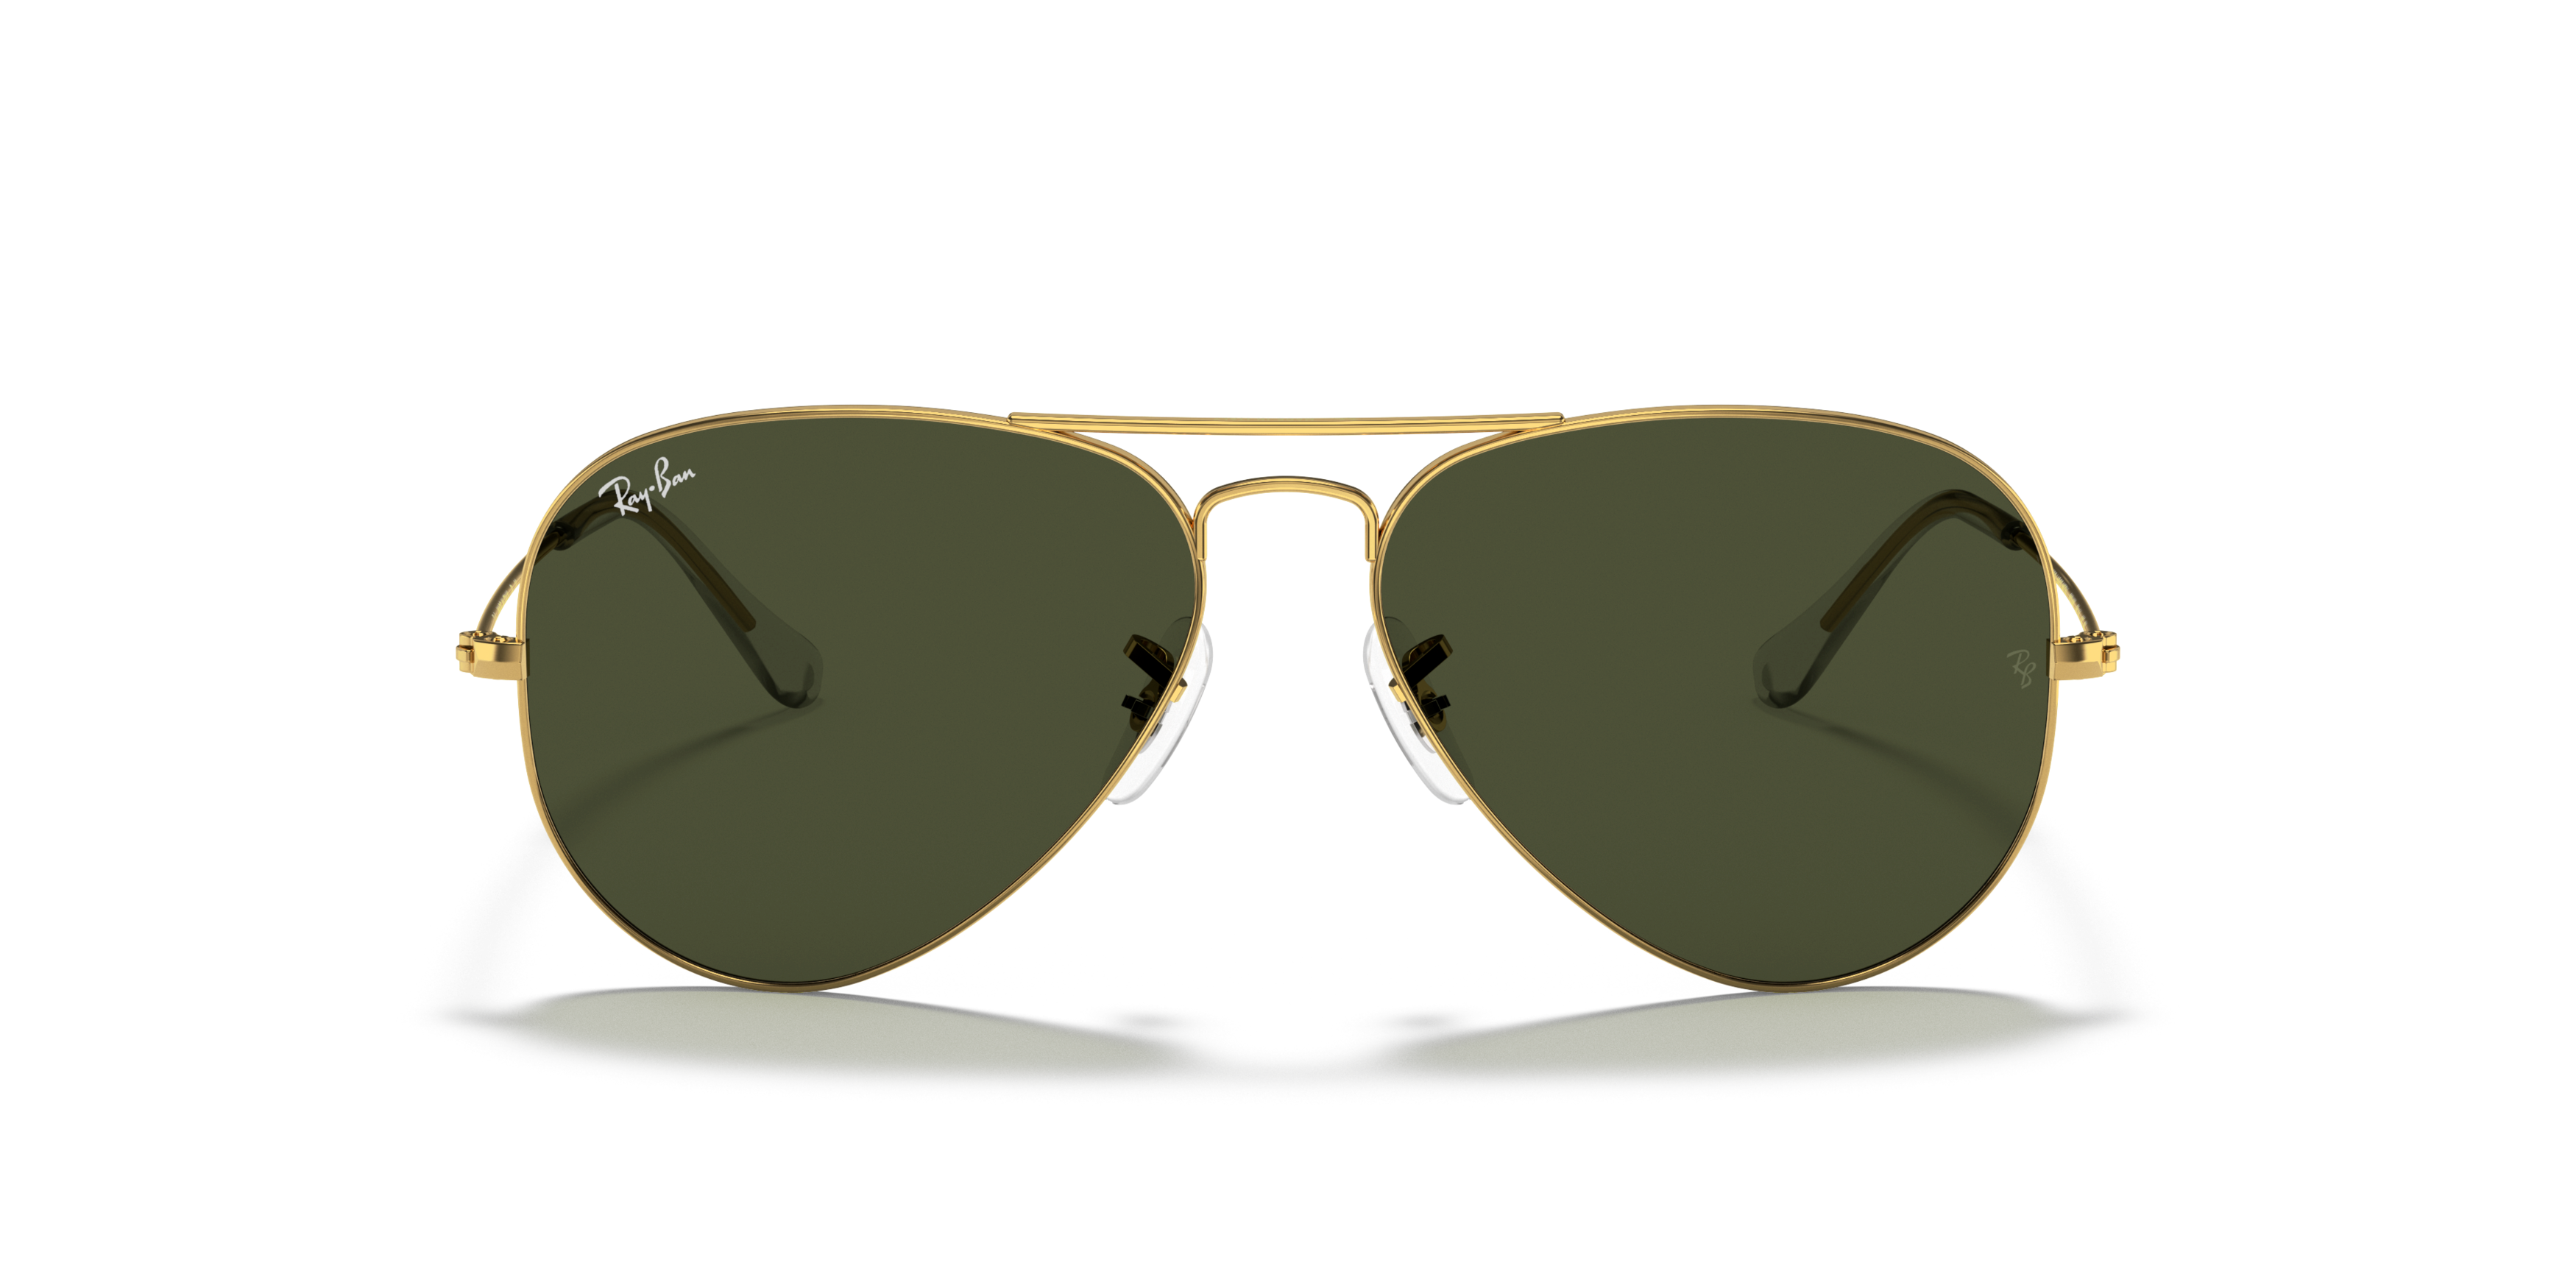 [products.image.front] Ray-Ban AVIATOR L0205